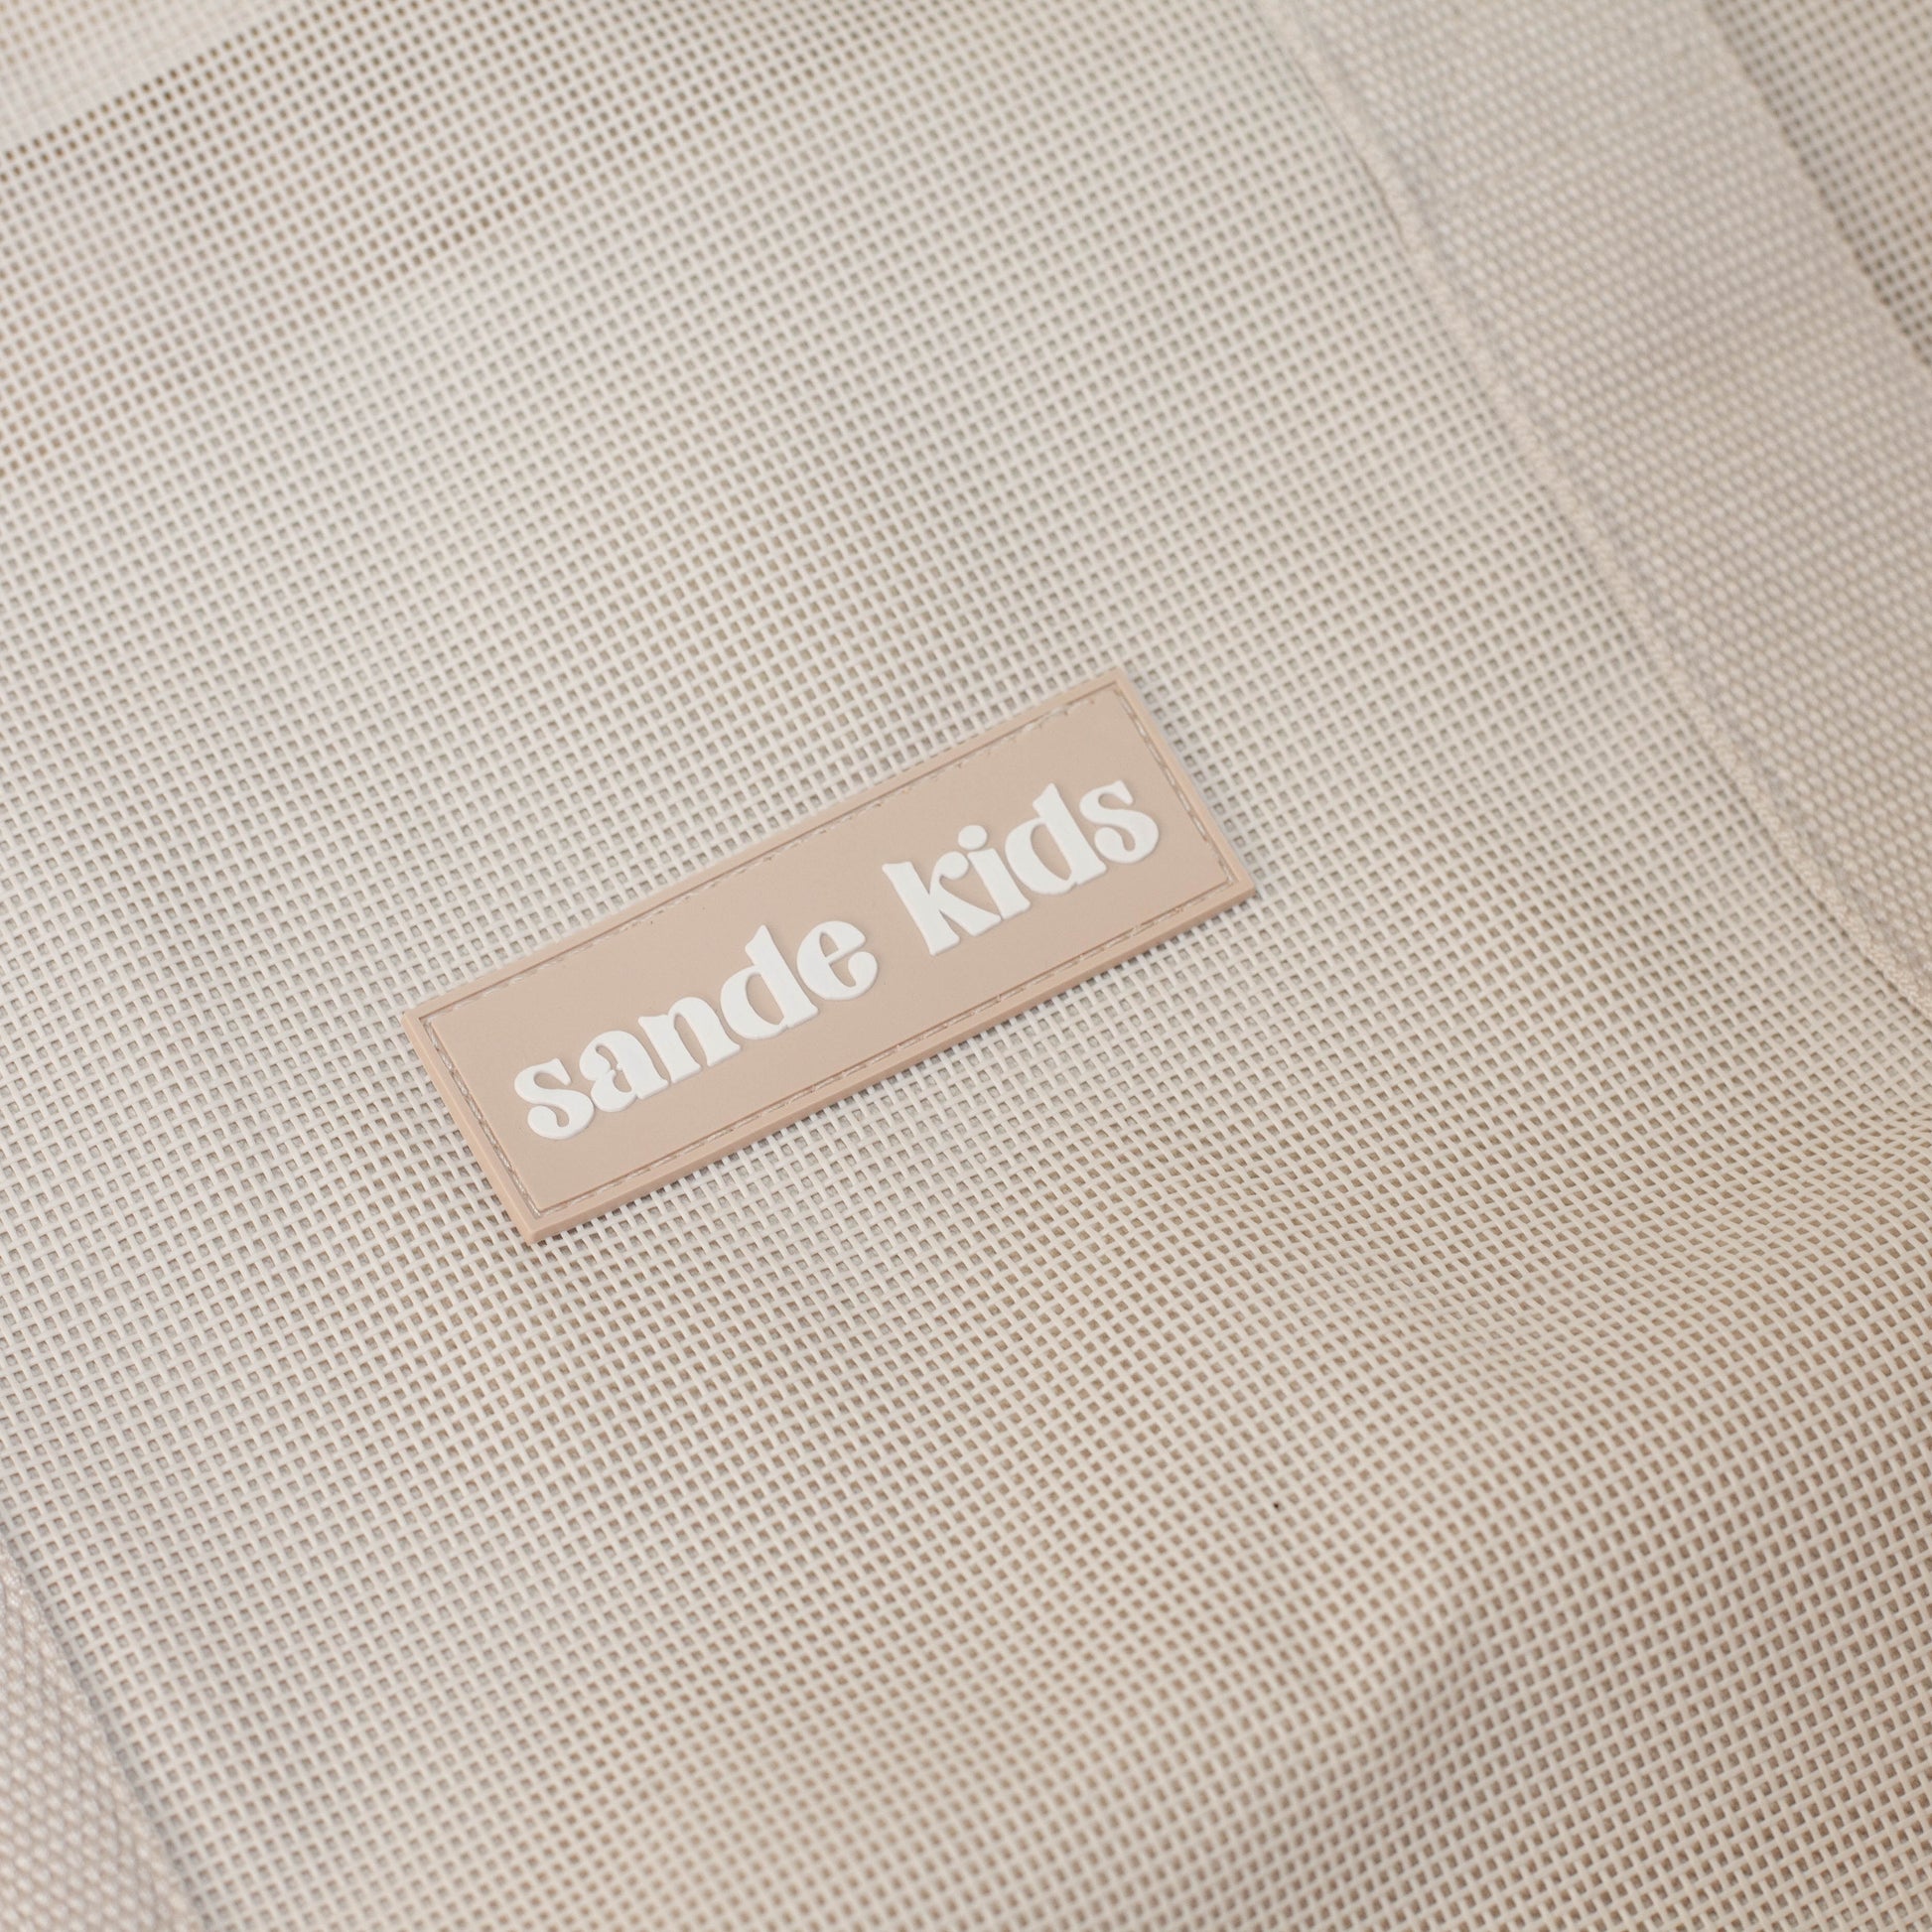 Sande Kids Beach Hauler™ - Close up on neutral mesh fabric and silicone brand label.